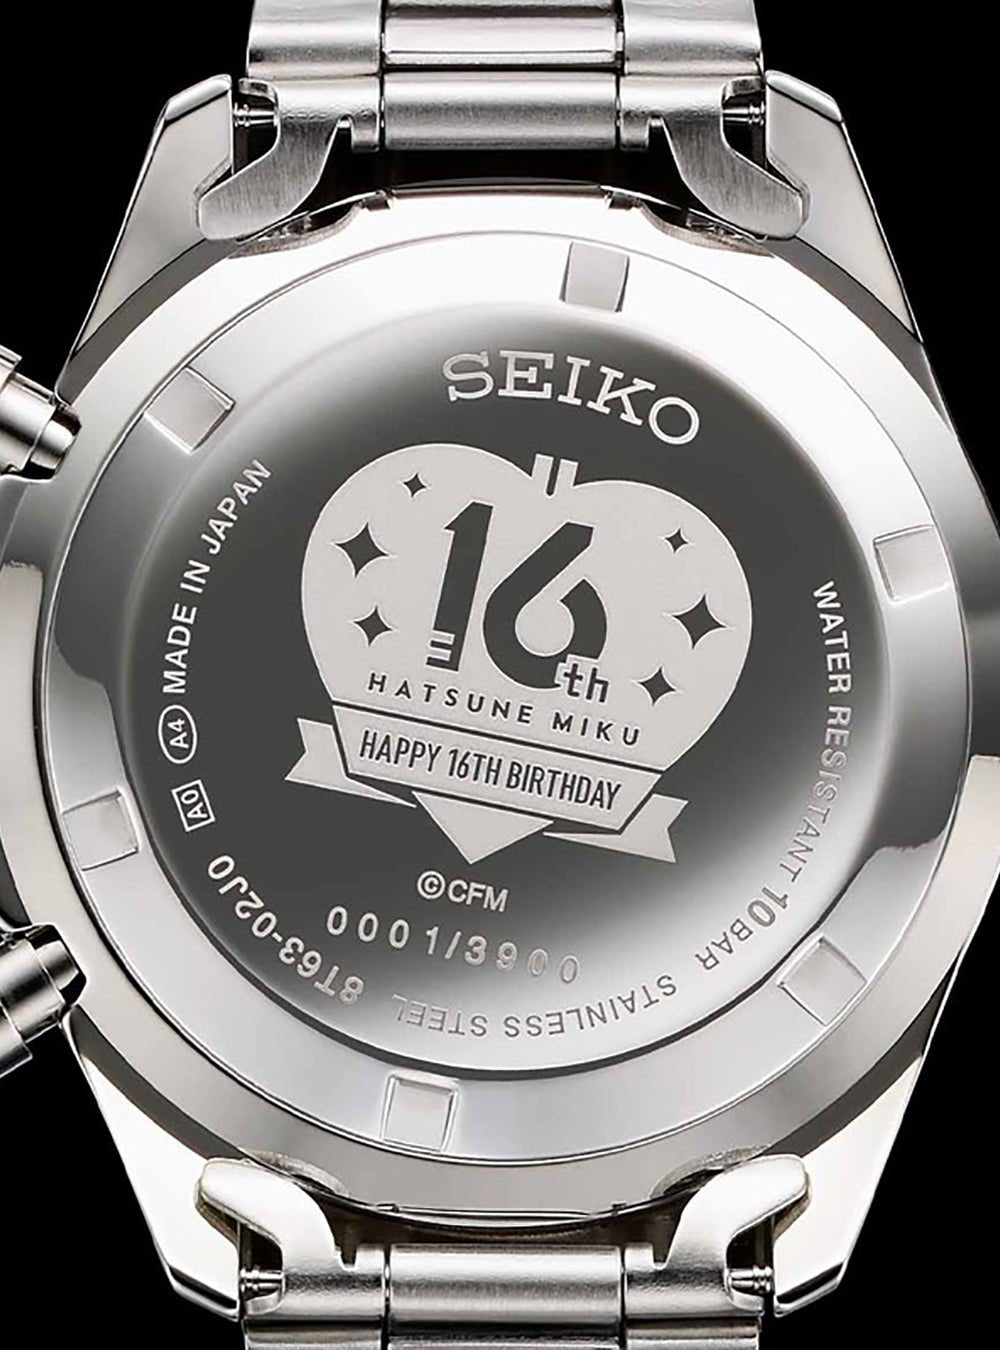 SEIKO × HATSUNE MIKU HAPPY 16TH BIRTHDAY COLLABORATION WATCH LIMITED EDITION MADE IN JAPANWRISTWATCHjapan-select